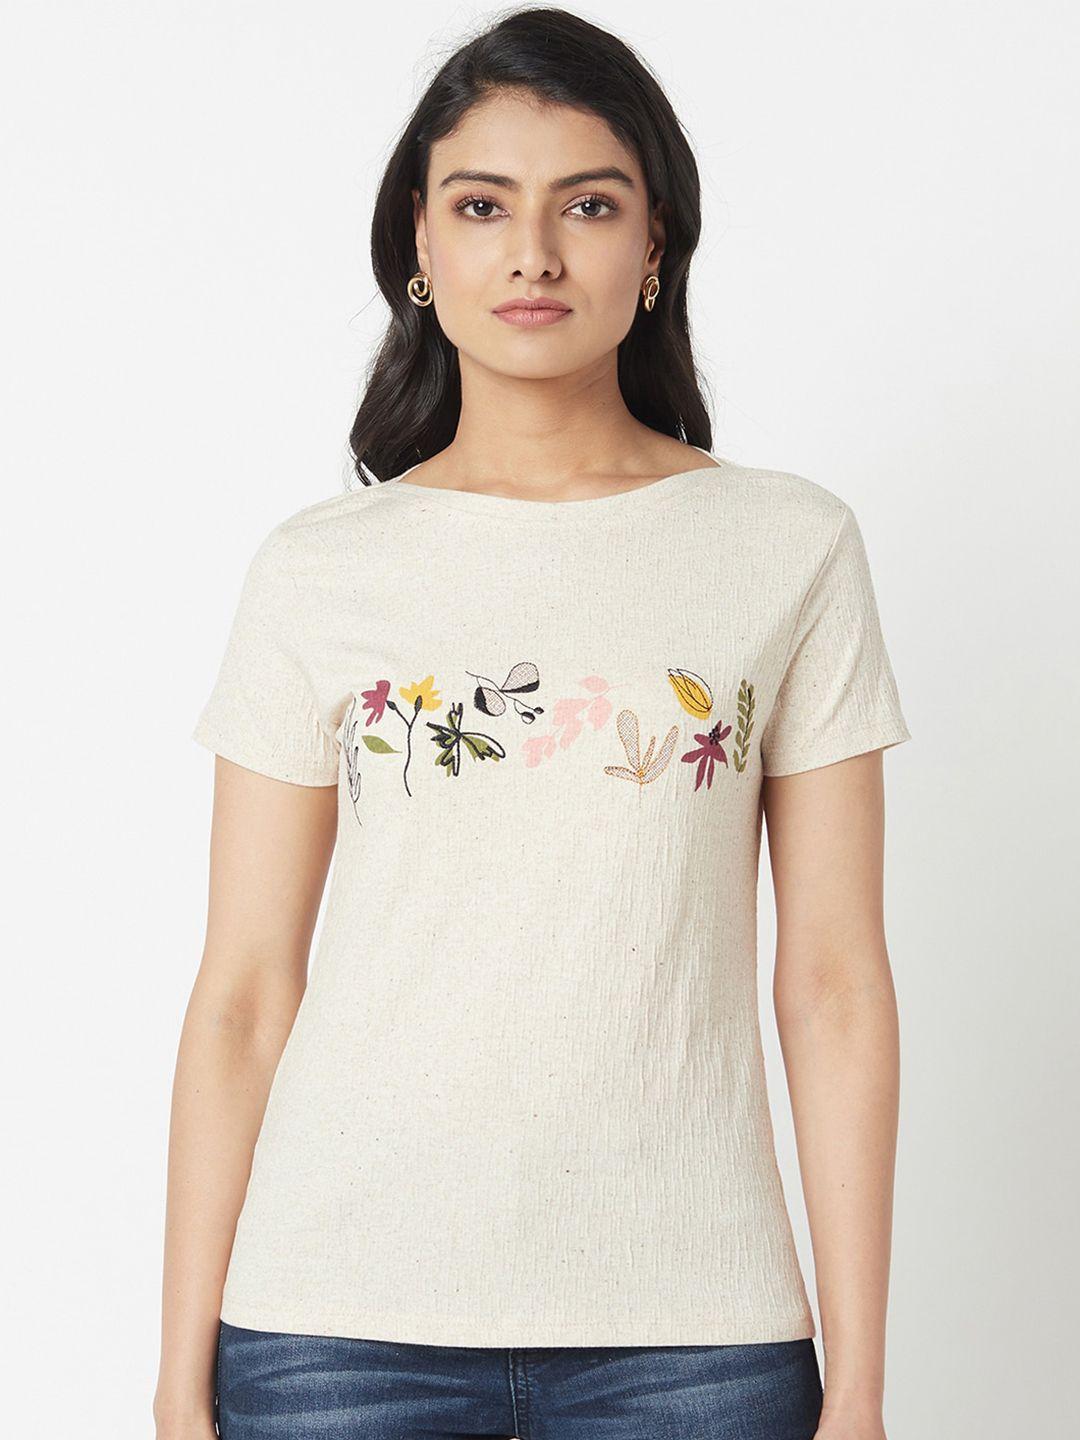 miss grace floral printed embroidered regular top